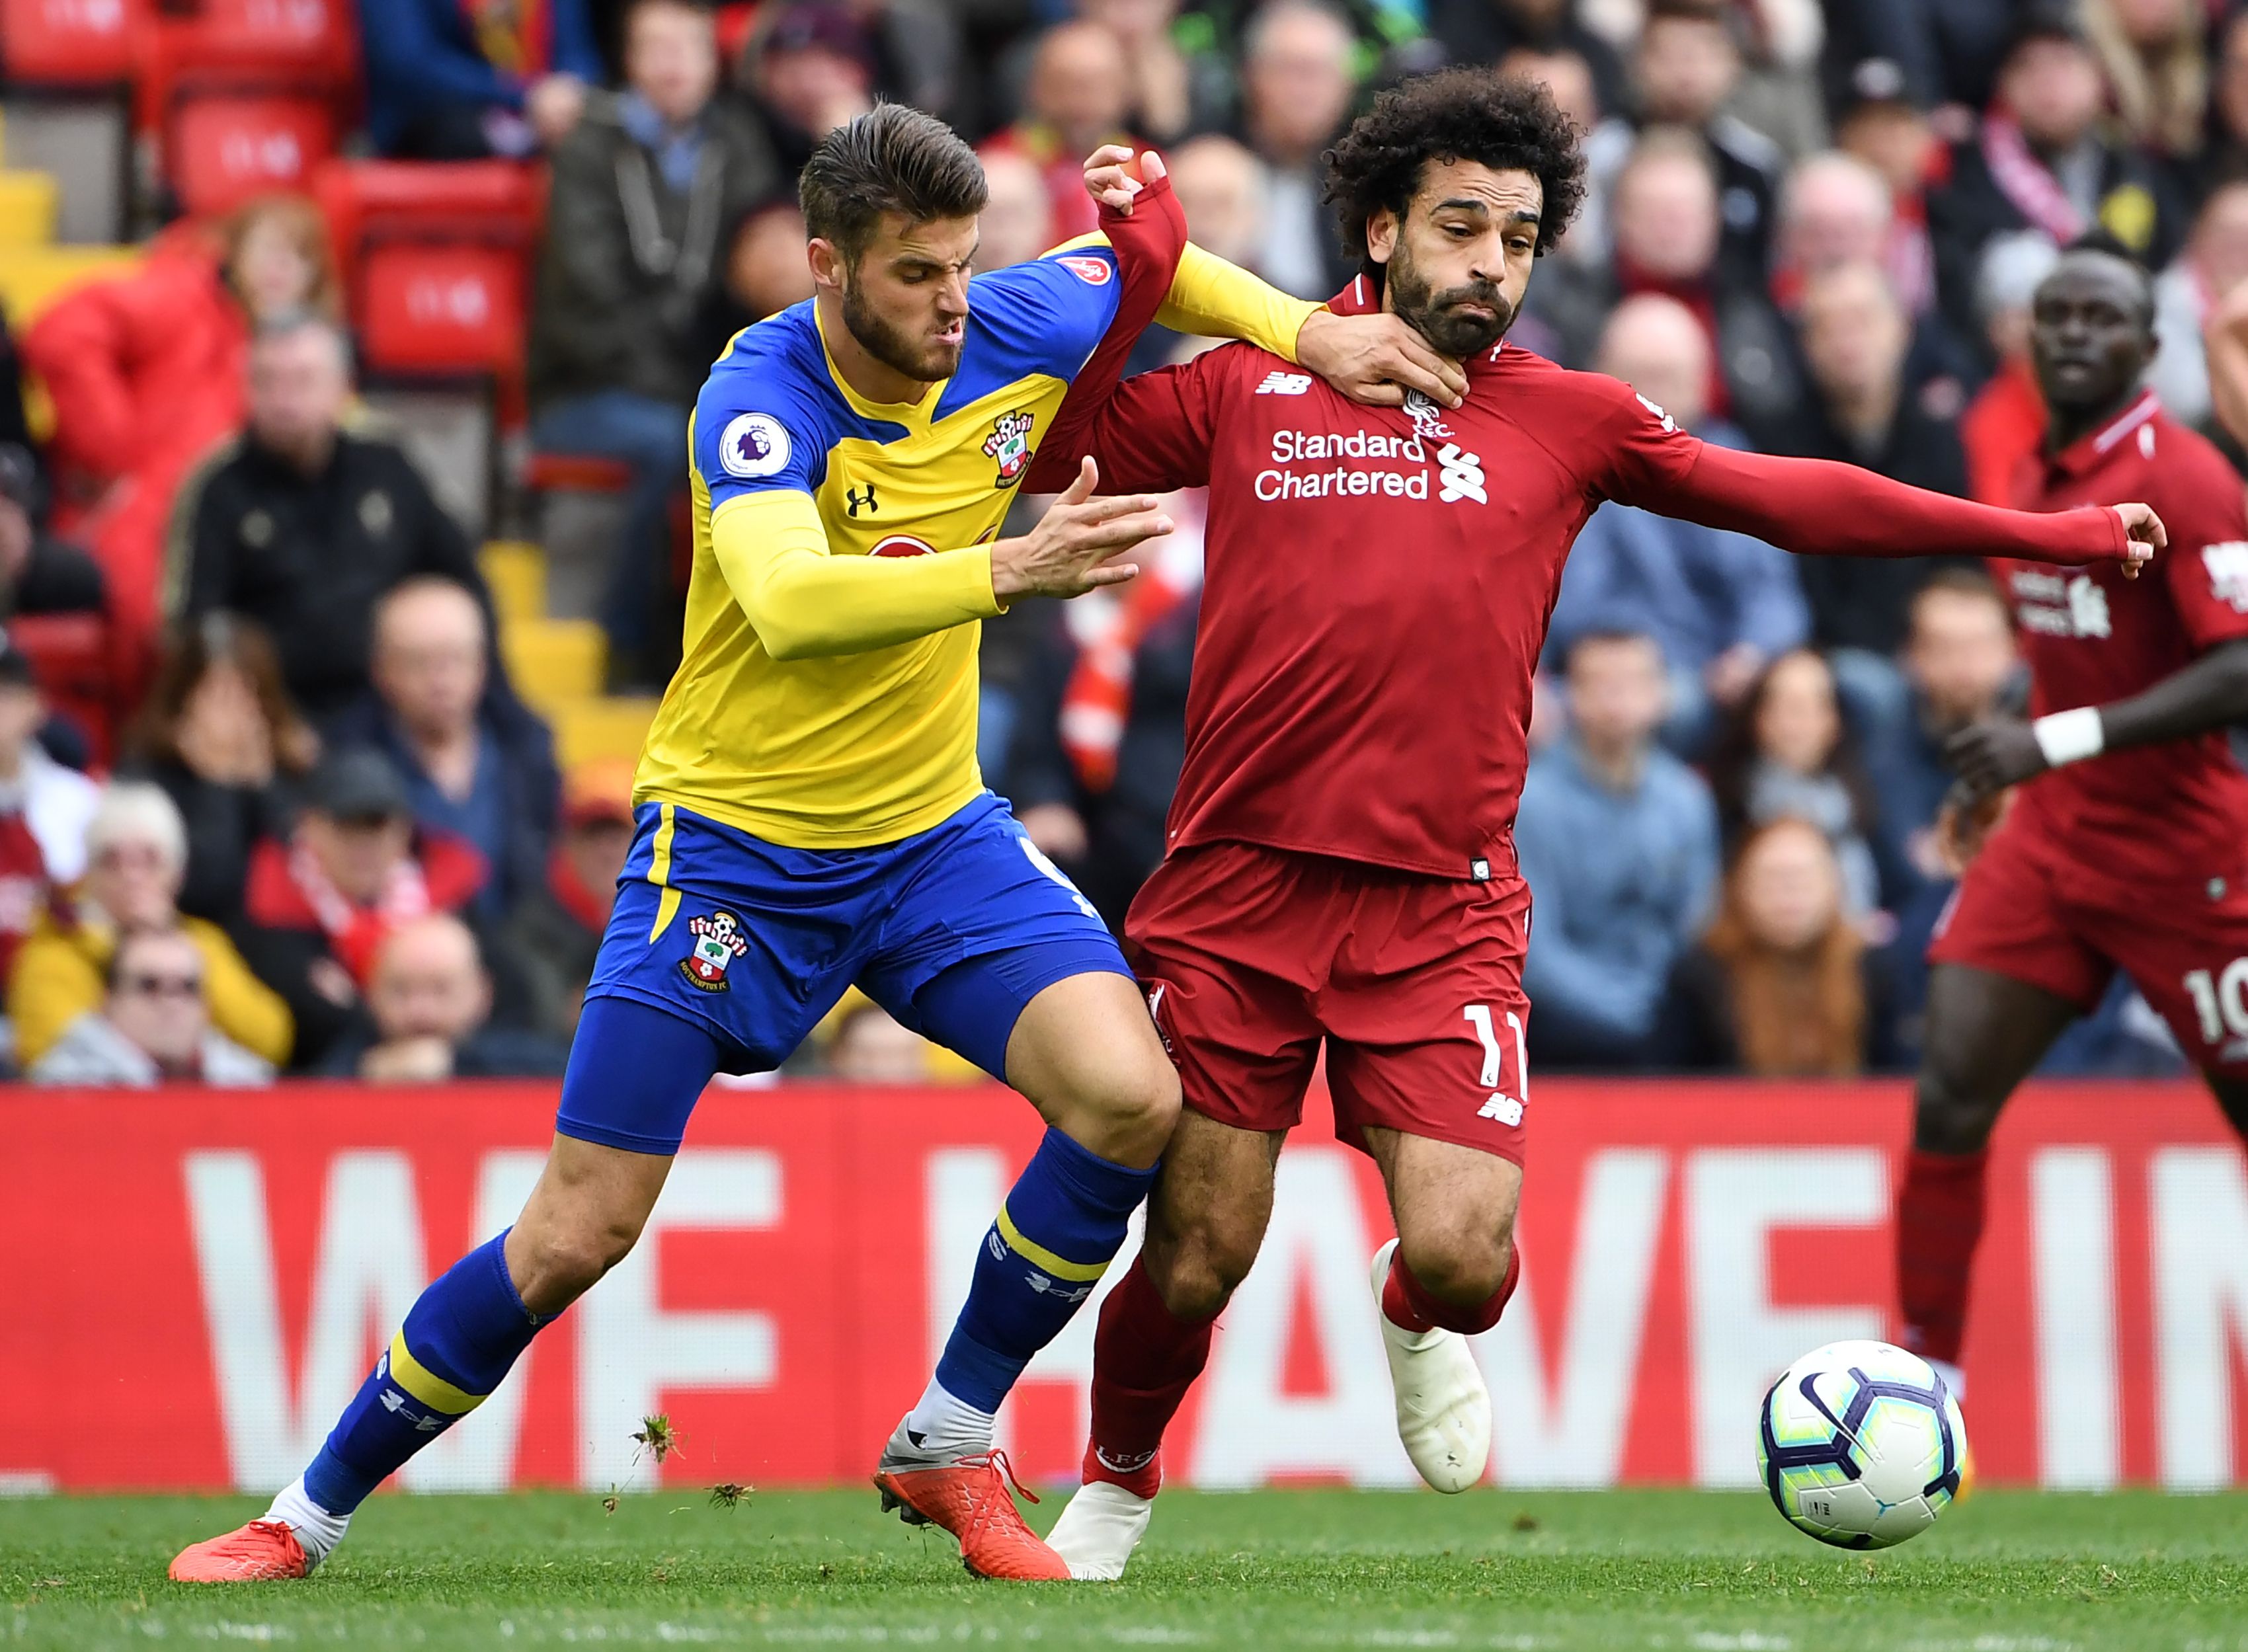 Southampton's English striker Danny Ings (L) vies with Liverpool's Egyptian midfielder Mohamed Salah during the English Premier League football match between Liverpool and Southampton at Anfield in Liverpool, north west England on September 22, 2018. (Photo by Paul ELLIS / AFP) / RESTRICTED TO EDITORIAL USE. No use with unauthorized audio, video, data, fixture lists, club/league logos or 'live' services. Online in-match use limited to 120 images. An additional 40 images may be used in extra time. No video emulation. Social media in-match use limited to 120 images. An additional 40 images may be used in extra time. No use in betting publications, games or single club/league/player publications. /         (Photo credit should read PAUL ELLIS/AFP/Getty Images)